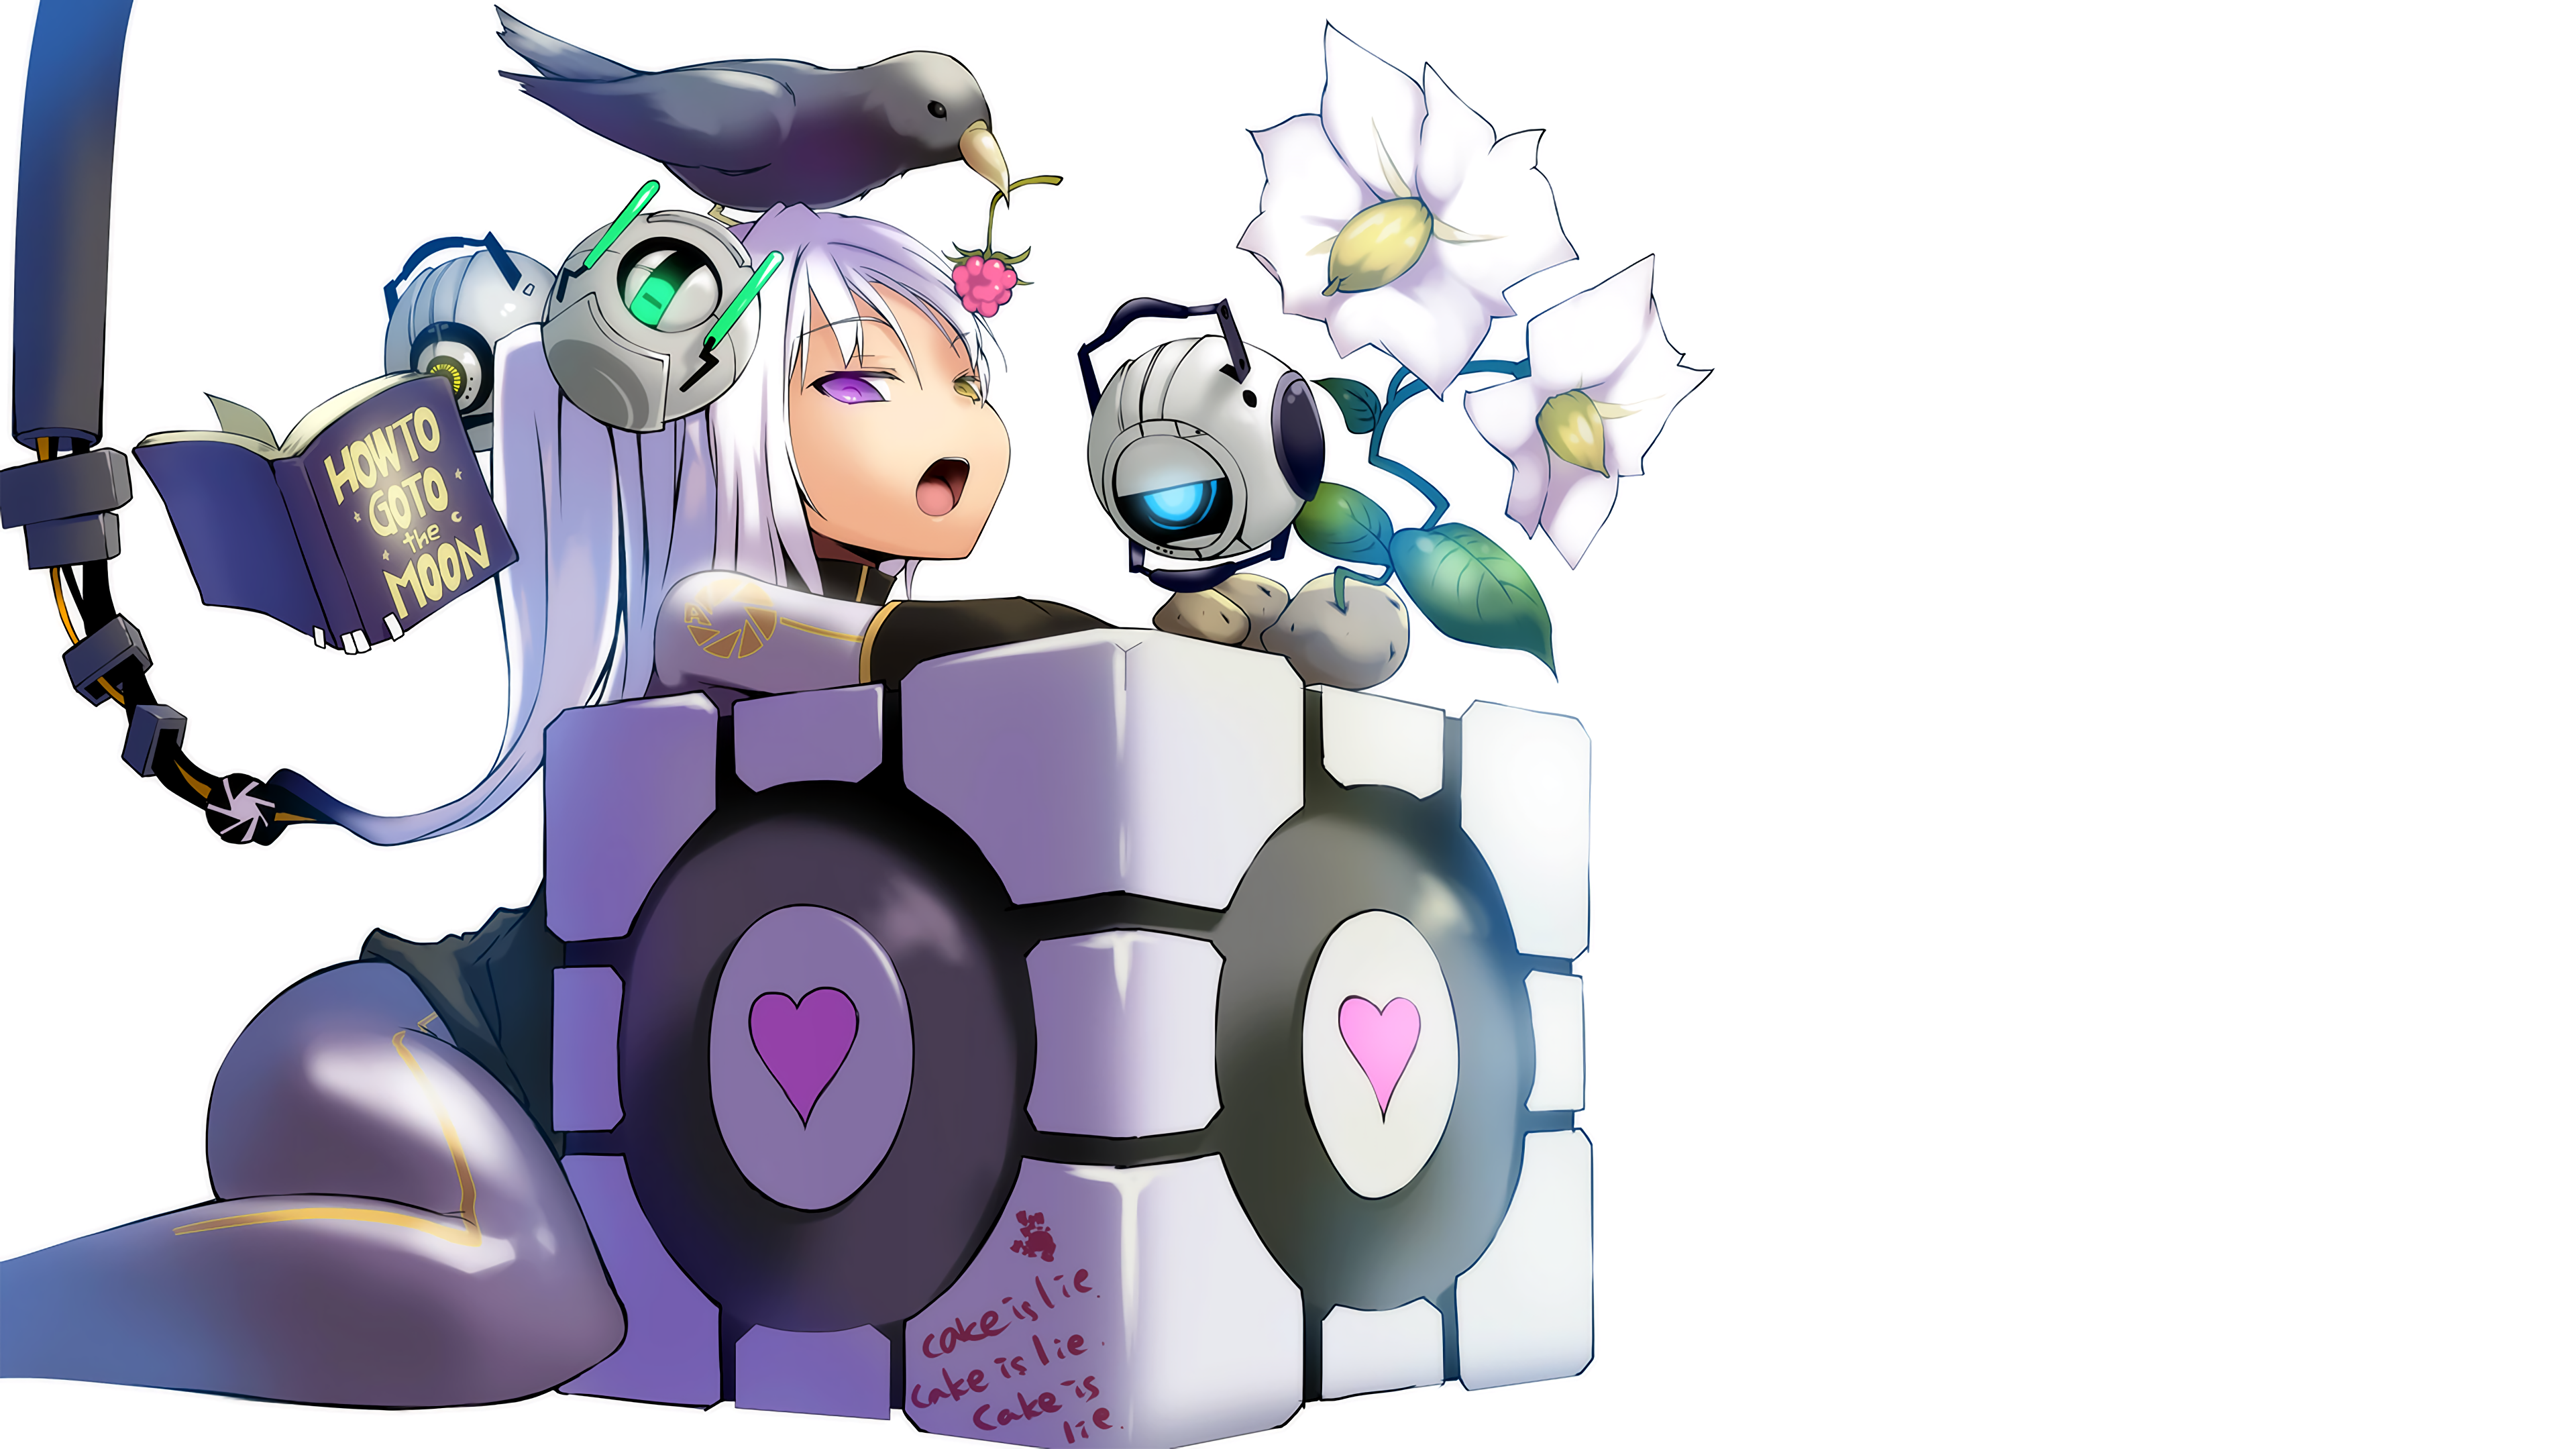 Anime 3840x2160 anime anime girls white skin simple background Portal (game) Companion Cube white background Aperture Laboratories humor GLaDOS 3D Blocks open mouth birds books video games video game art PC gaming video game girls